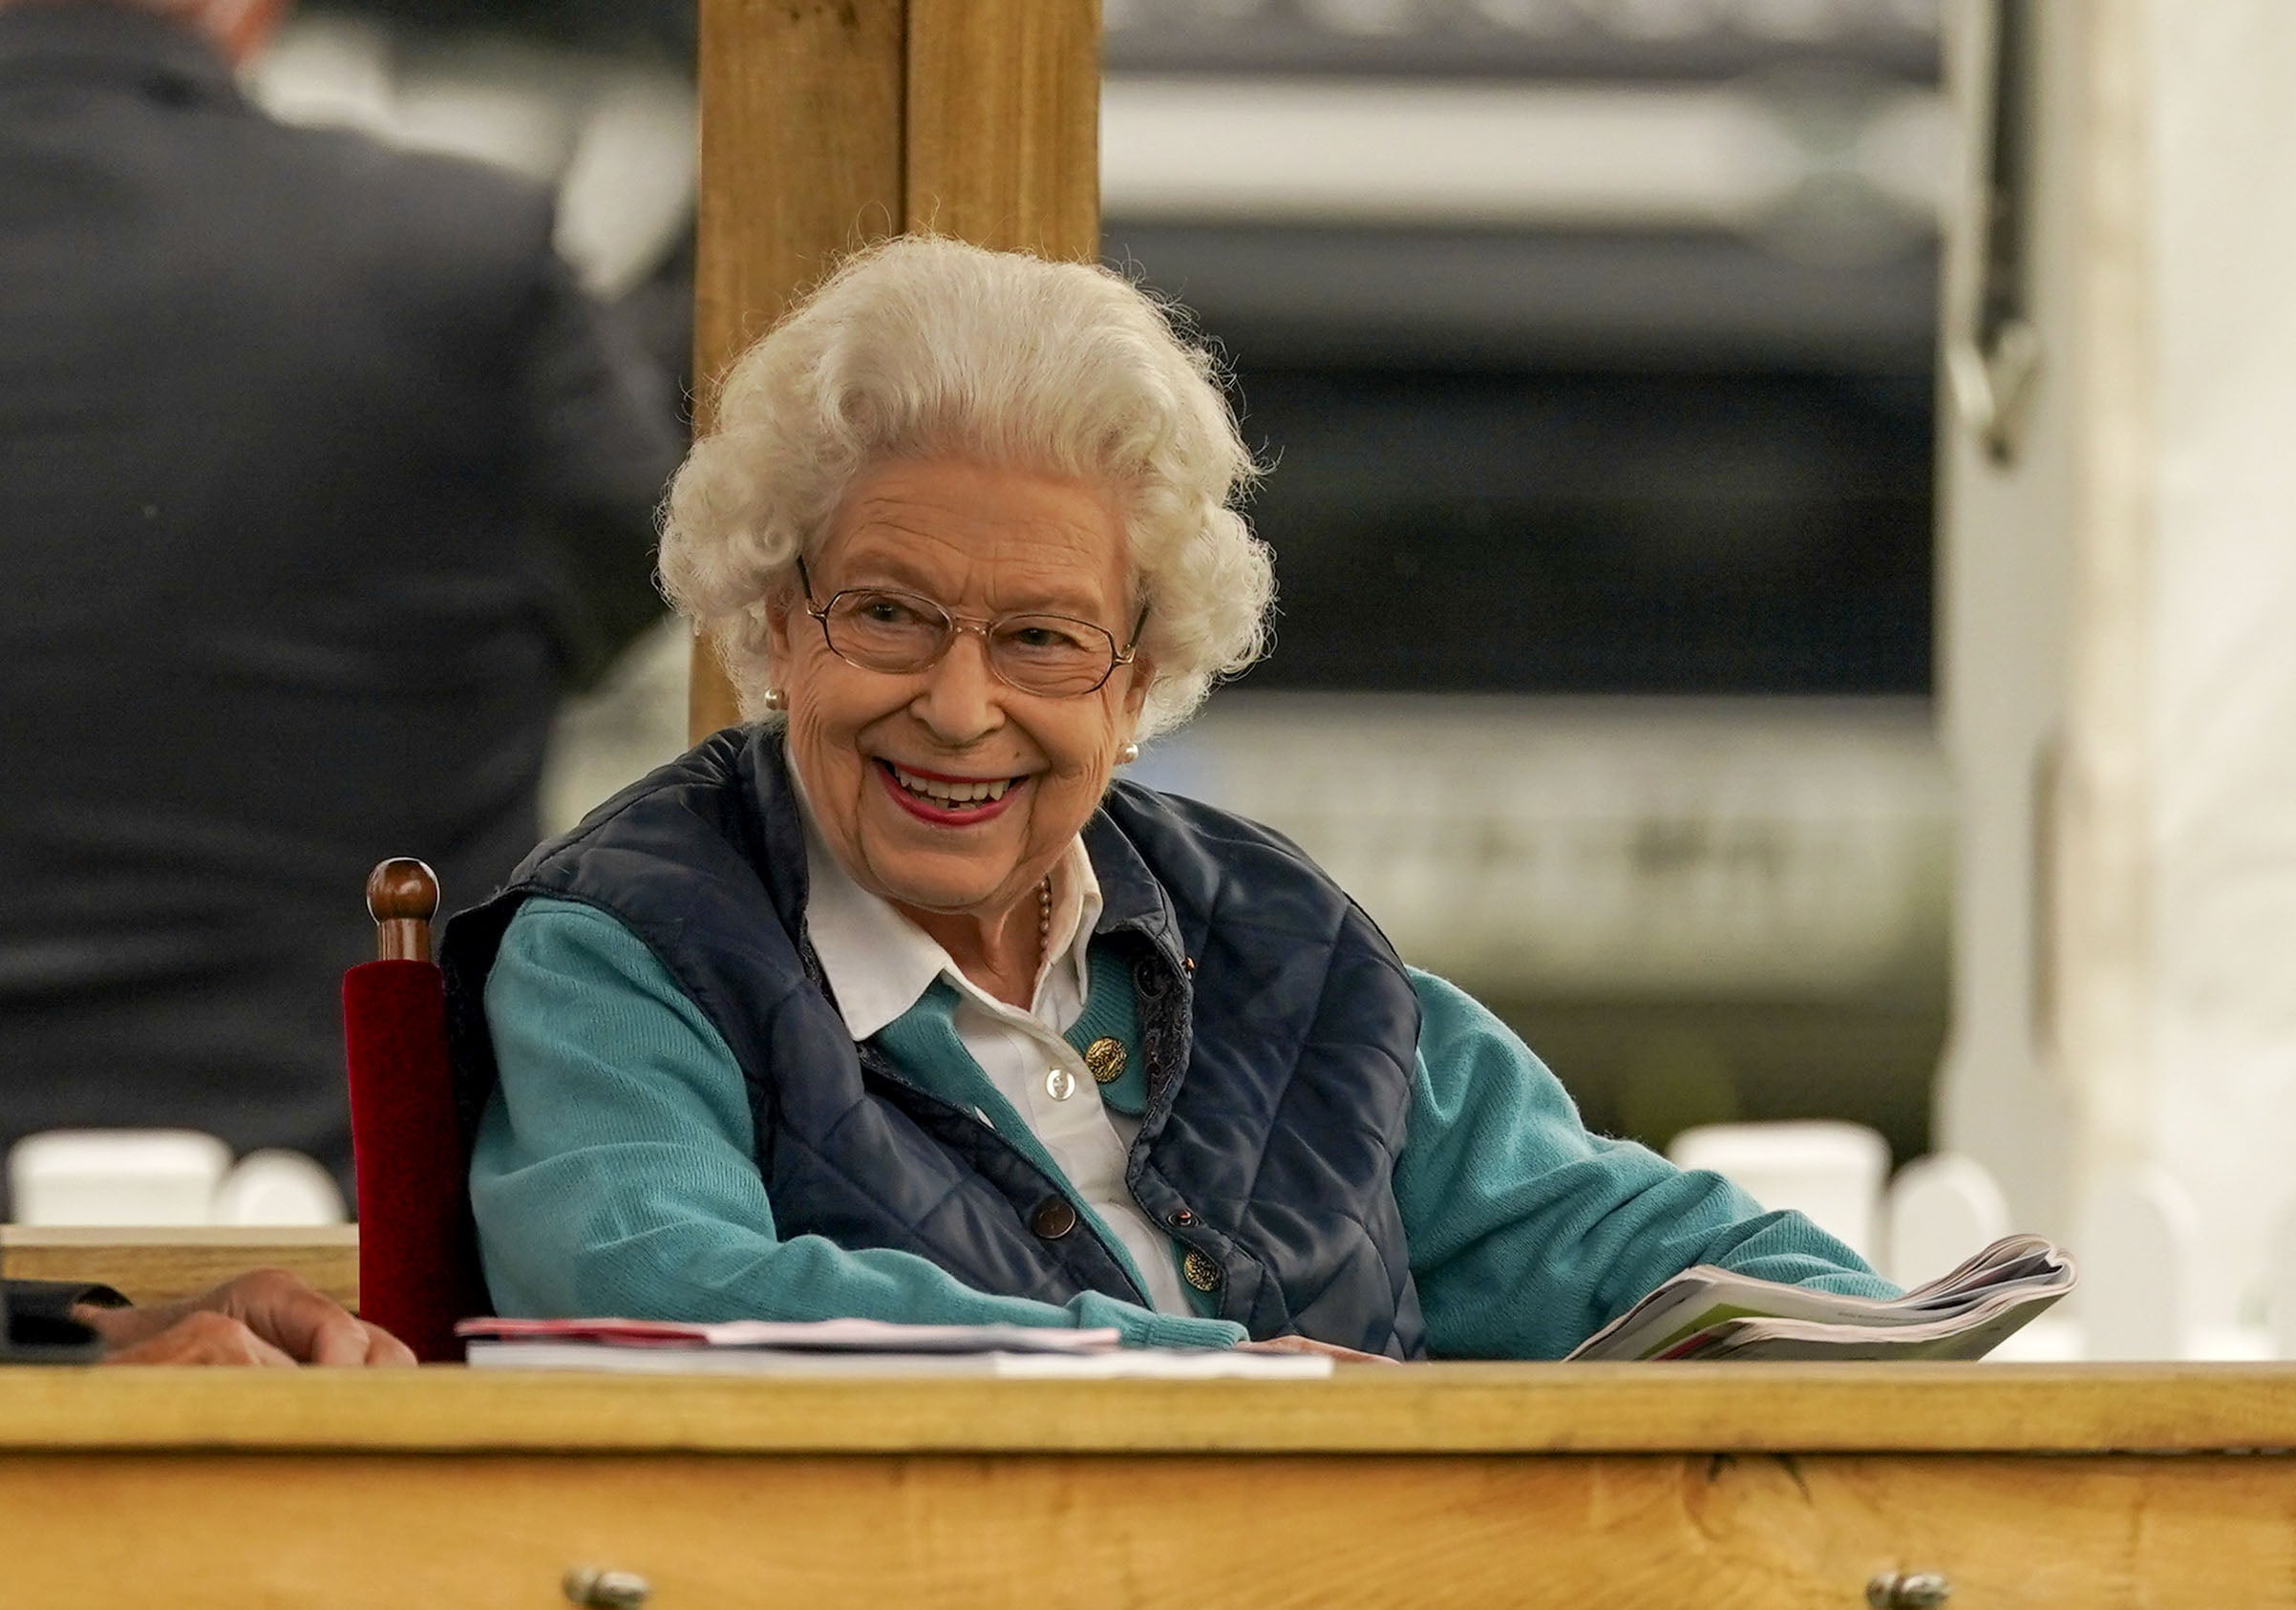 The Queen visited the Royal Windsor Horse Show in July (Steve Parsons/PA)